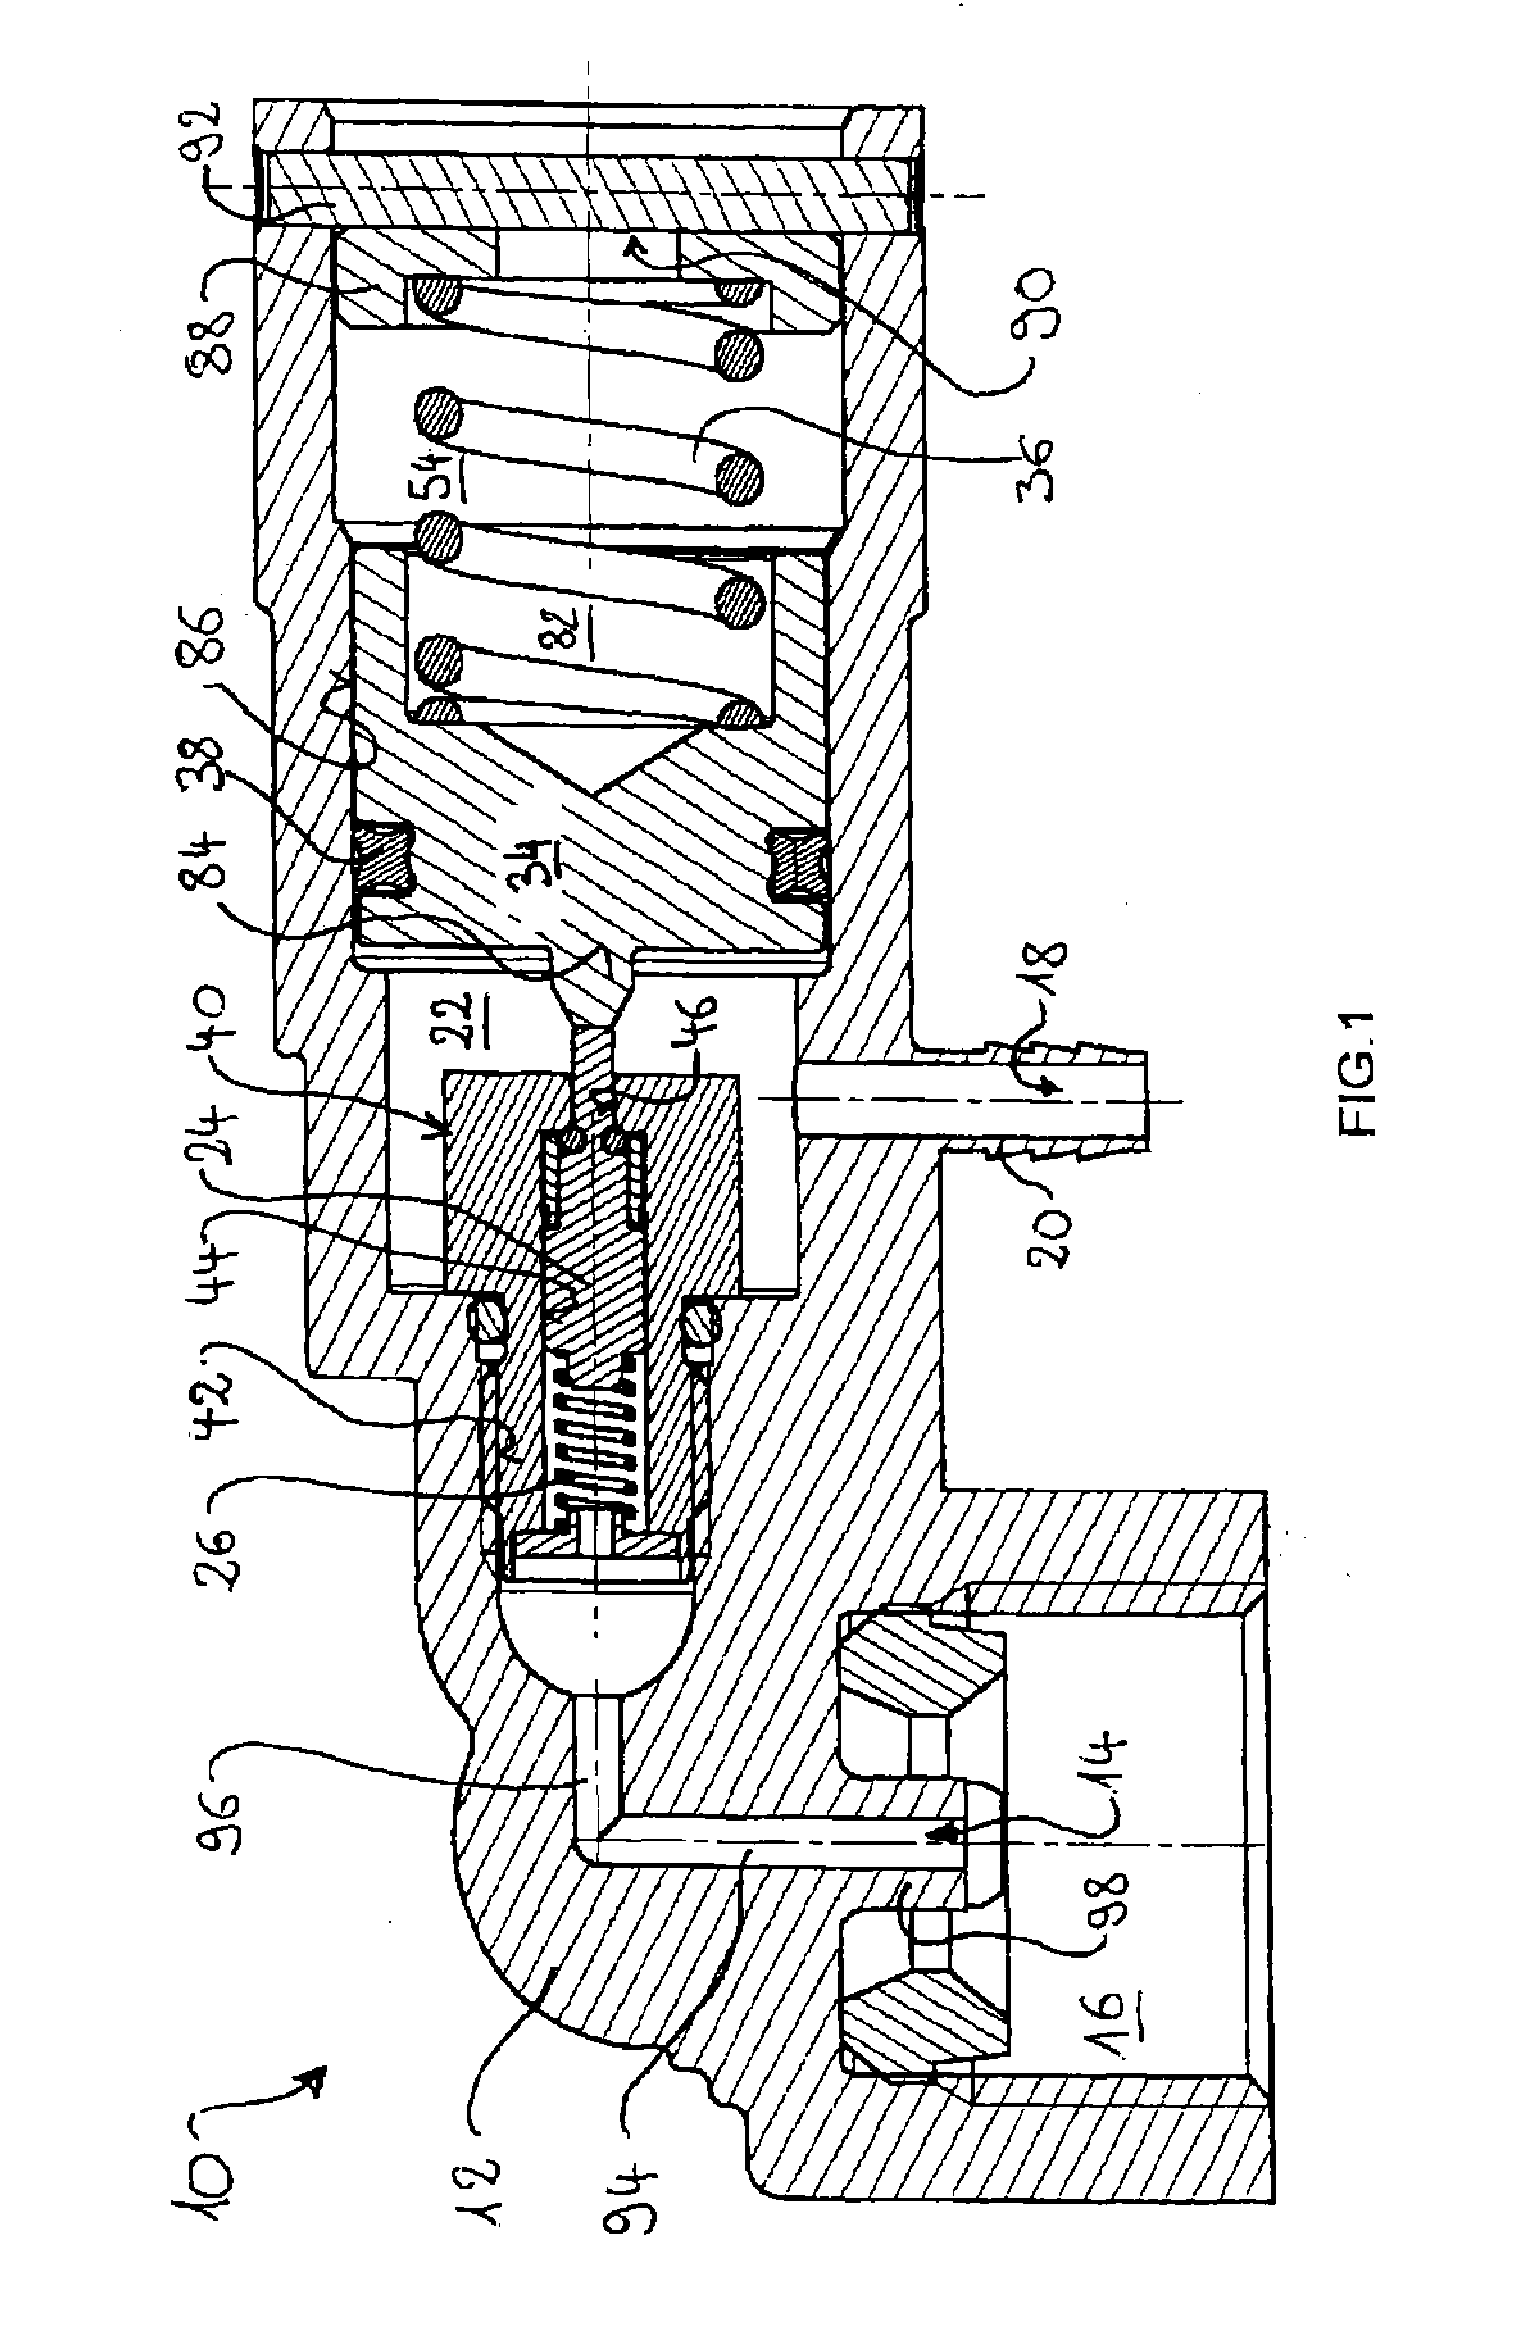 Pressure reducer for a device for enriching a liquid with carbon dioxide